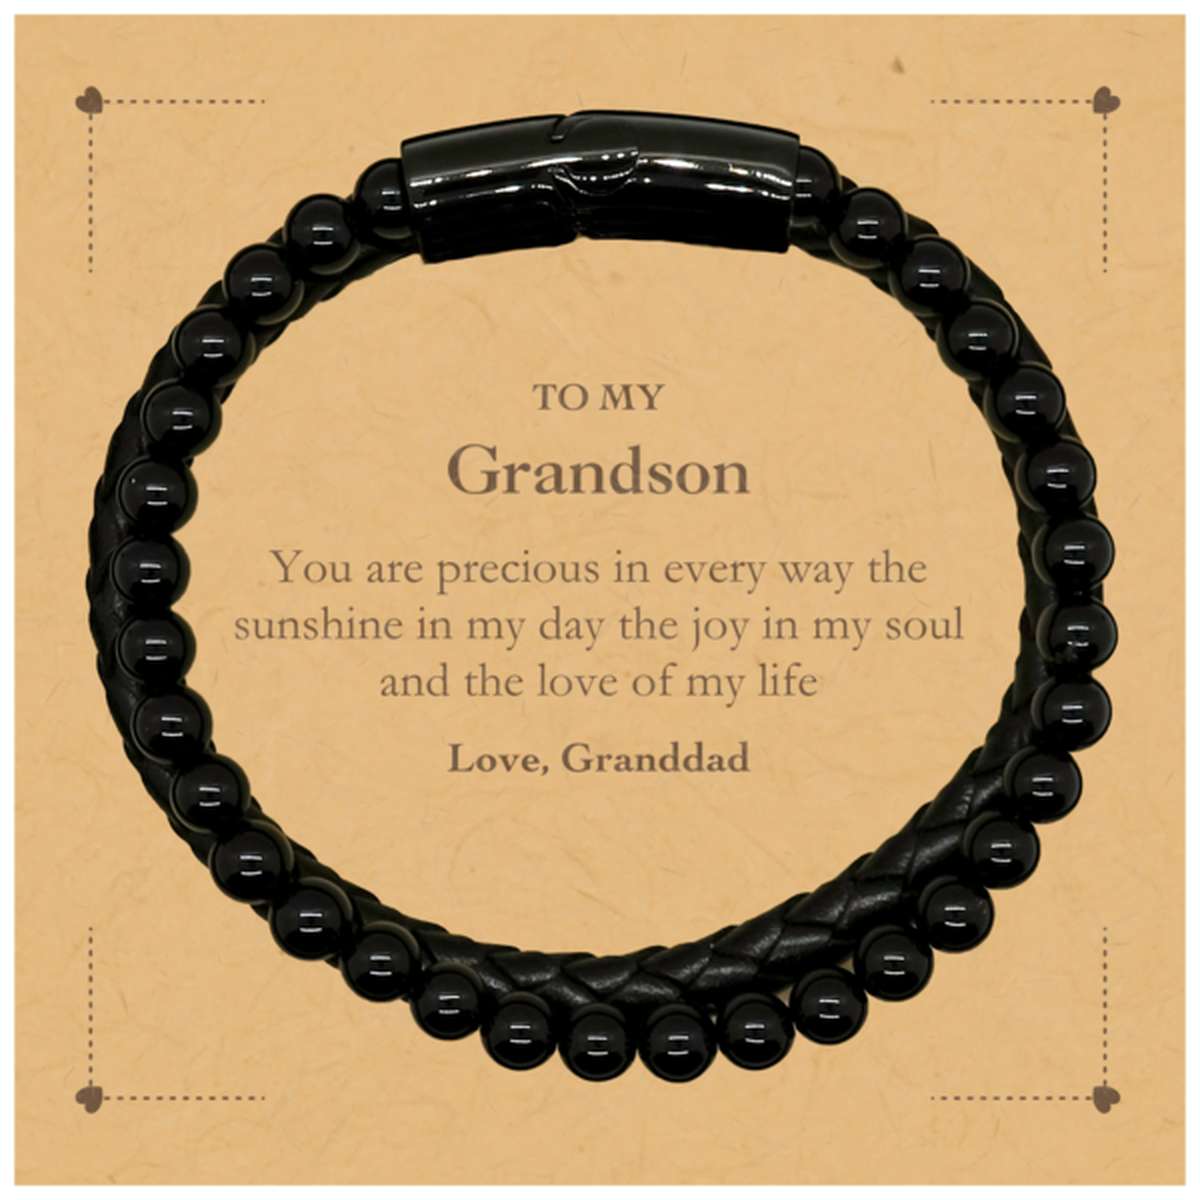 Graduation Gifts for Grandson Stone Leather Bracelets Present from Granddad, Christmas Grandson Birthday Gifts Grandson You are precious in every way the sunshine in my day. Love, Granddad